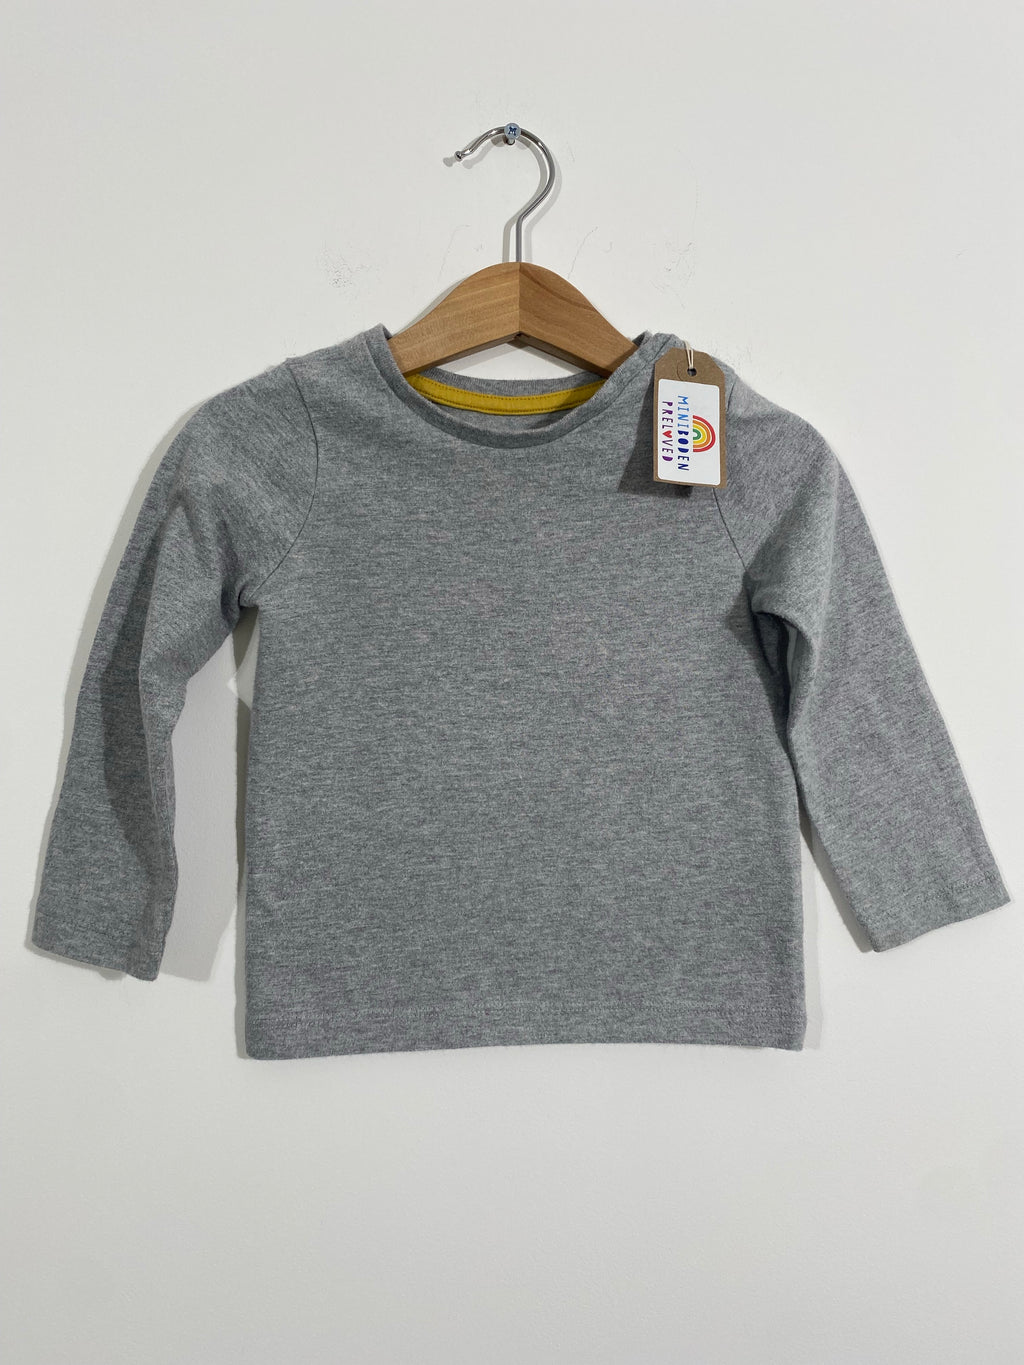 Classic Grey Long Sleeved Top (12-18 Months)